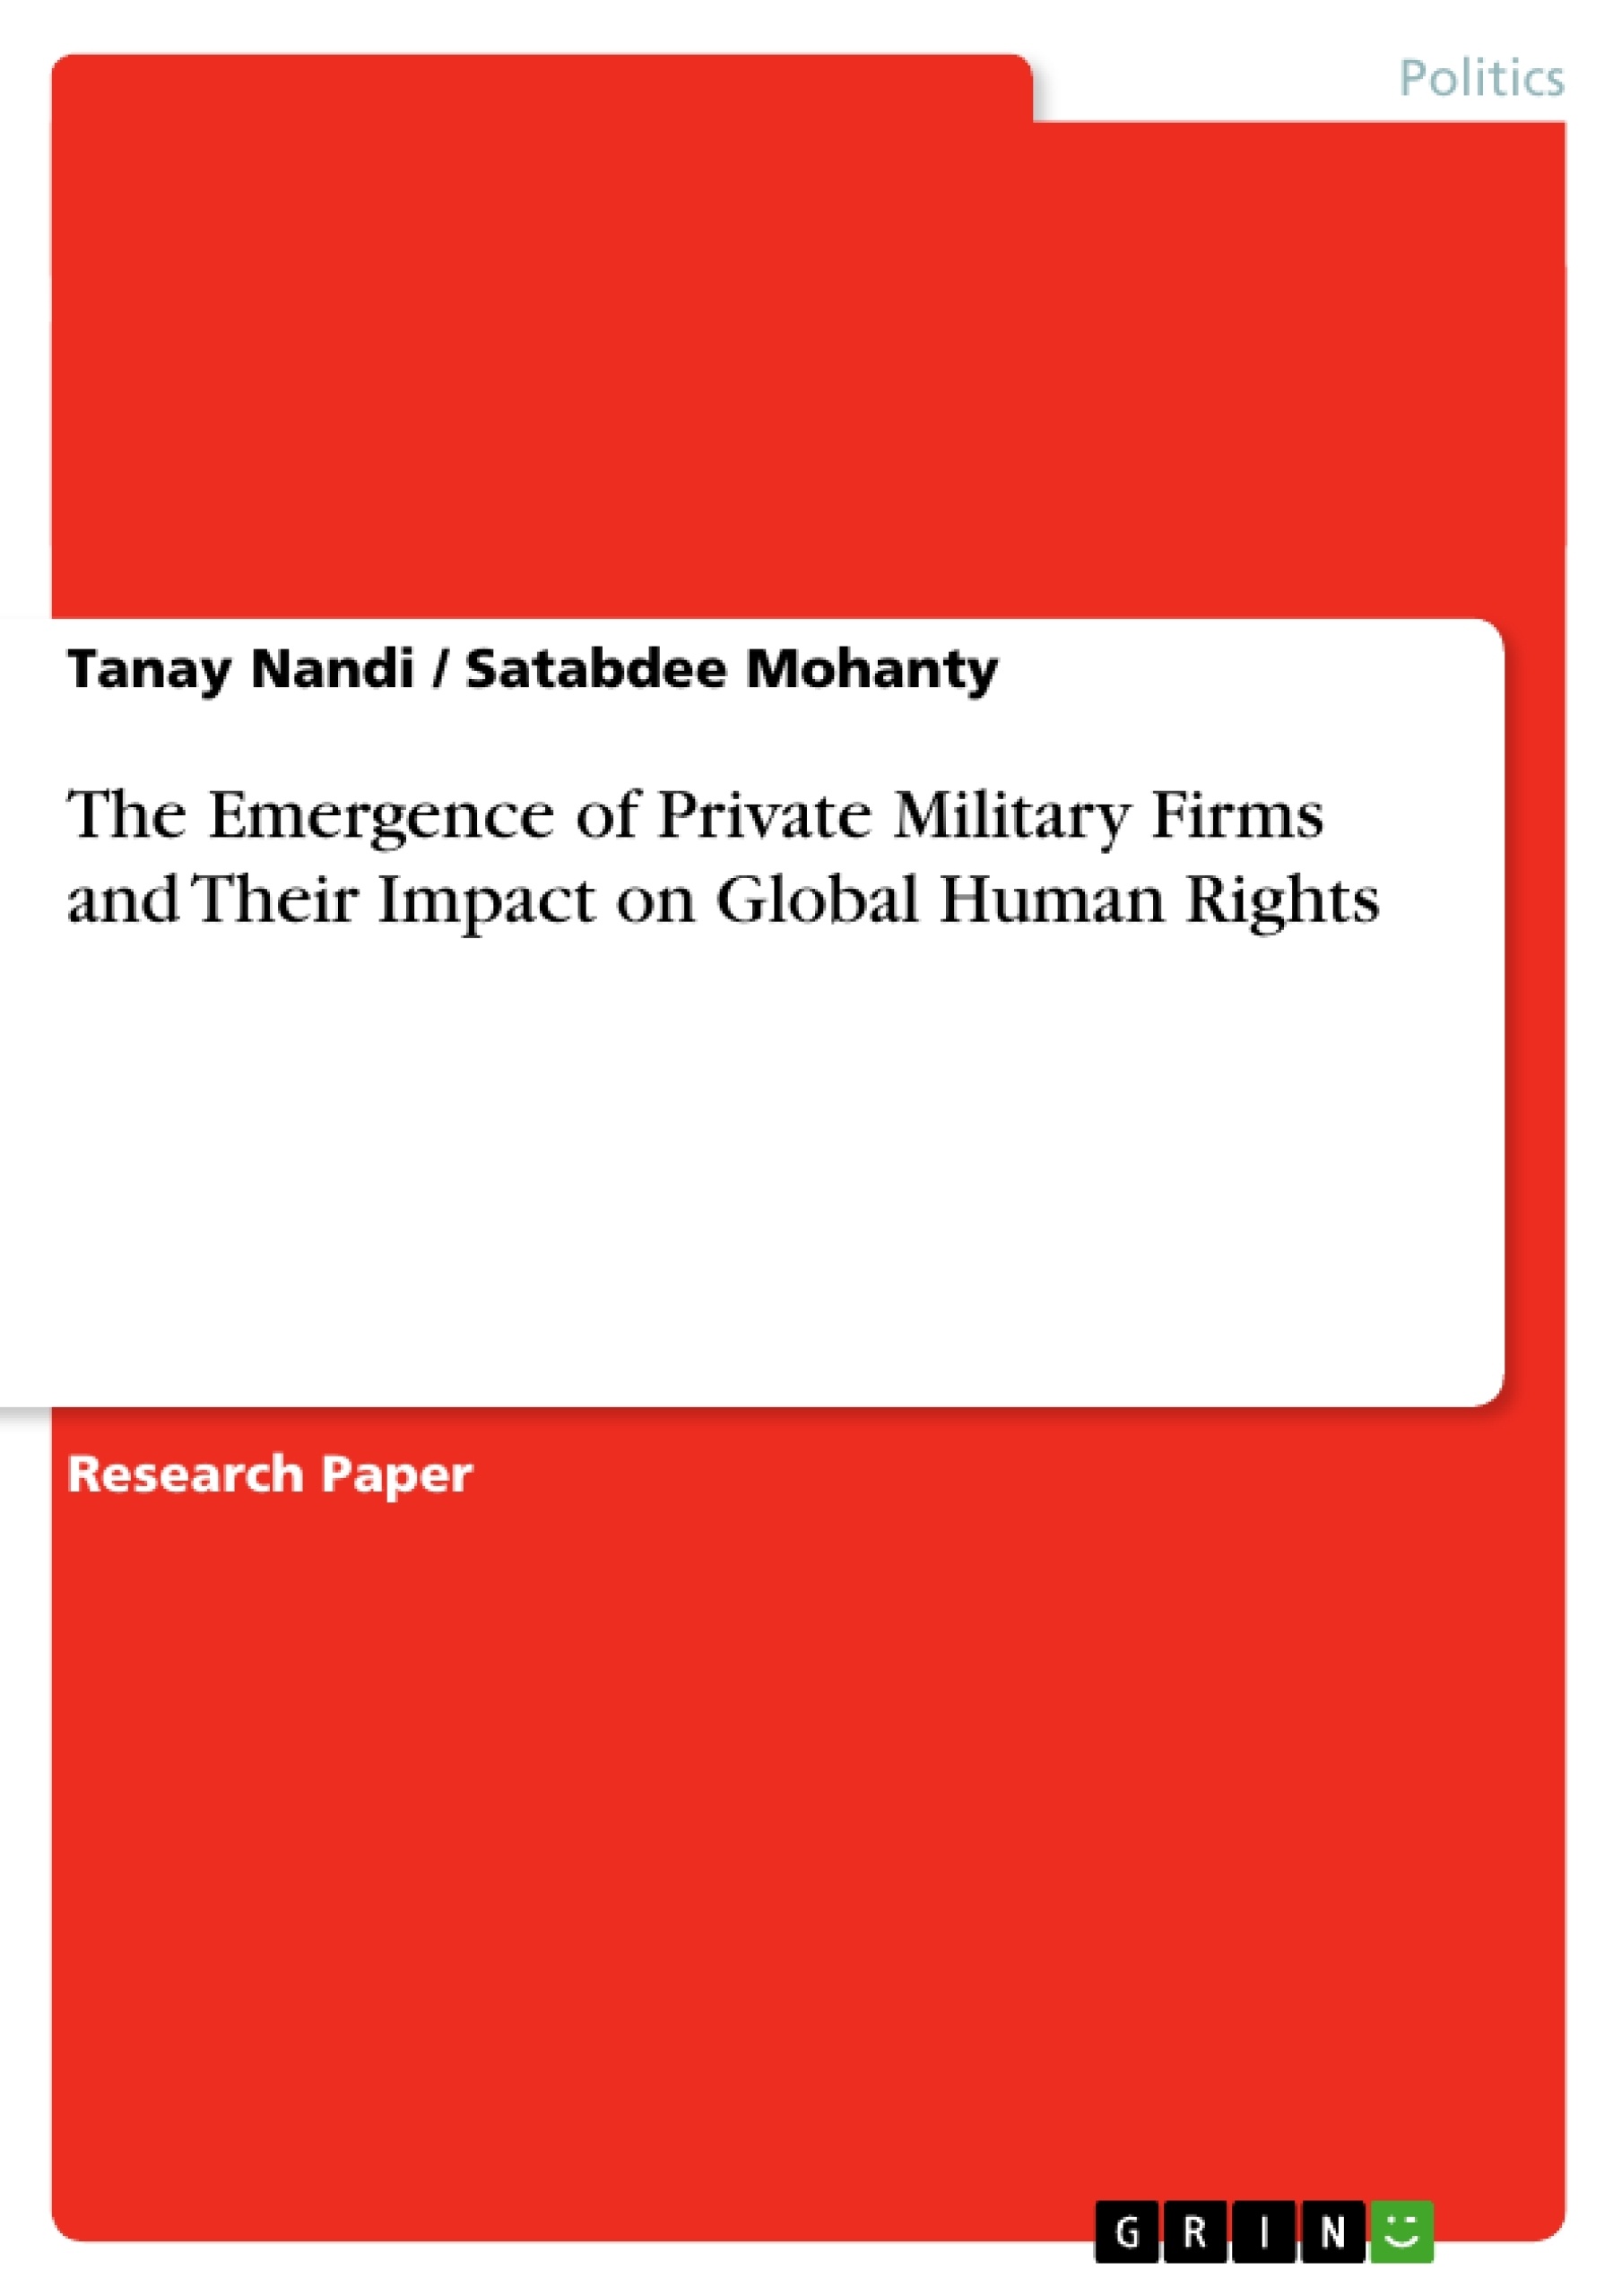 Title: The Emergence of Private Military Firms and Their Impact on Global Human Rights